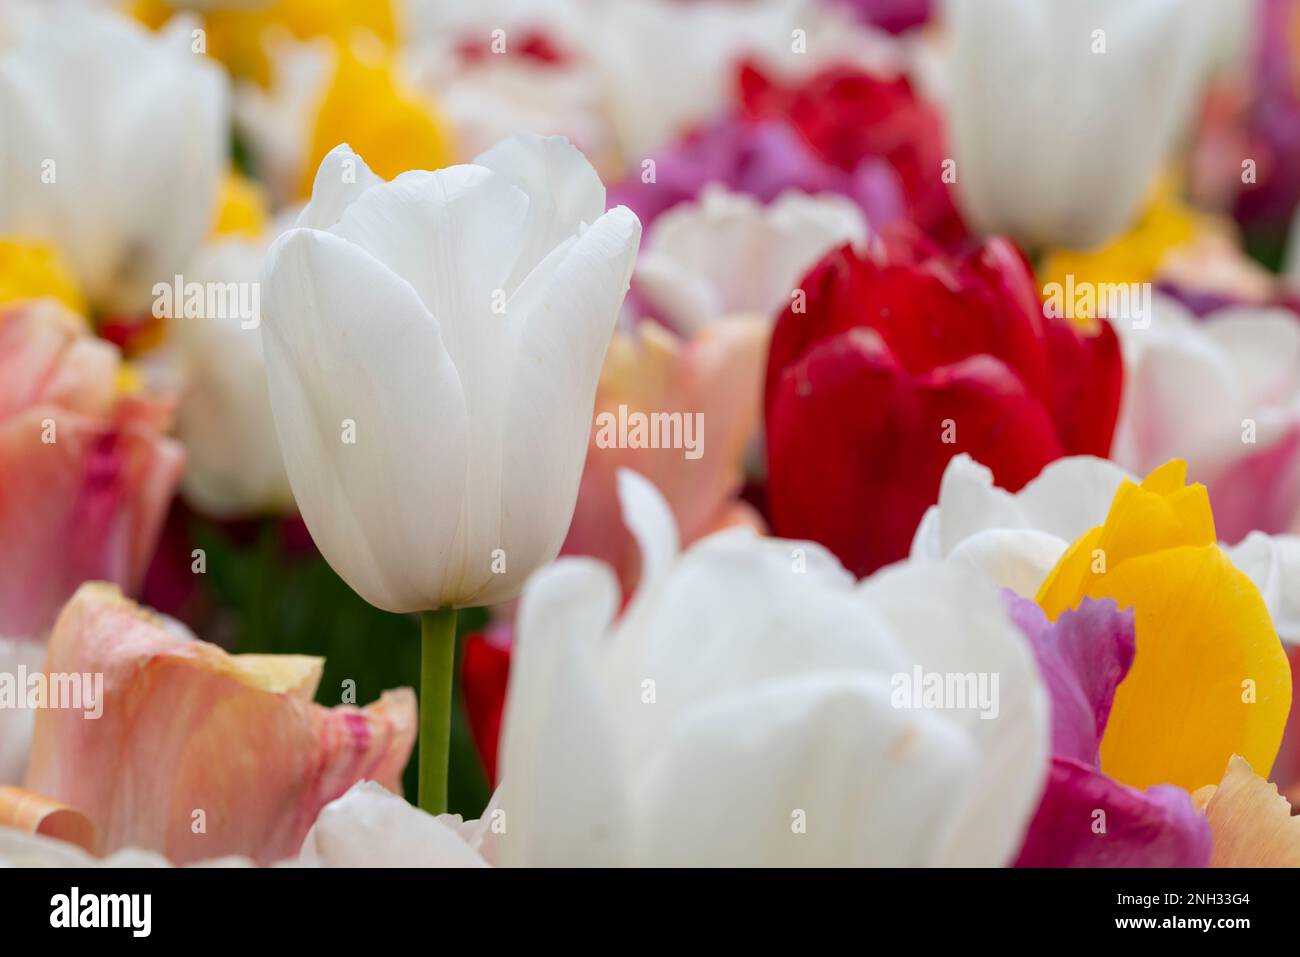 Amazing white tulip flowers blooming in a tulip field. Stock Photo